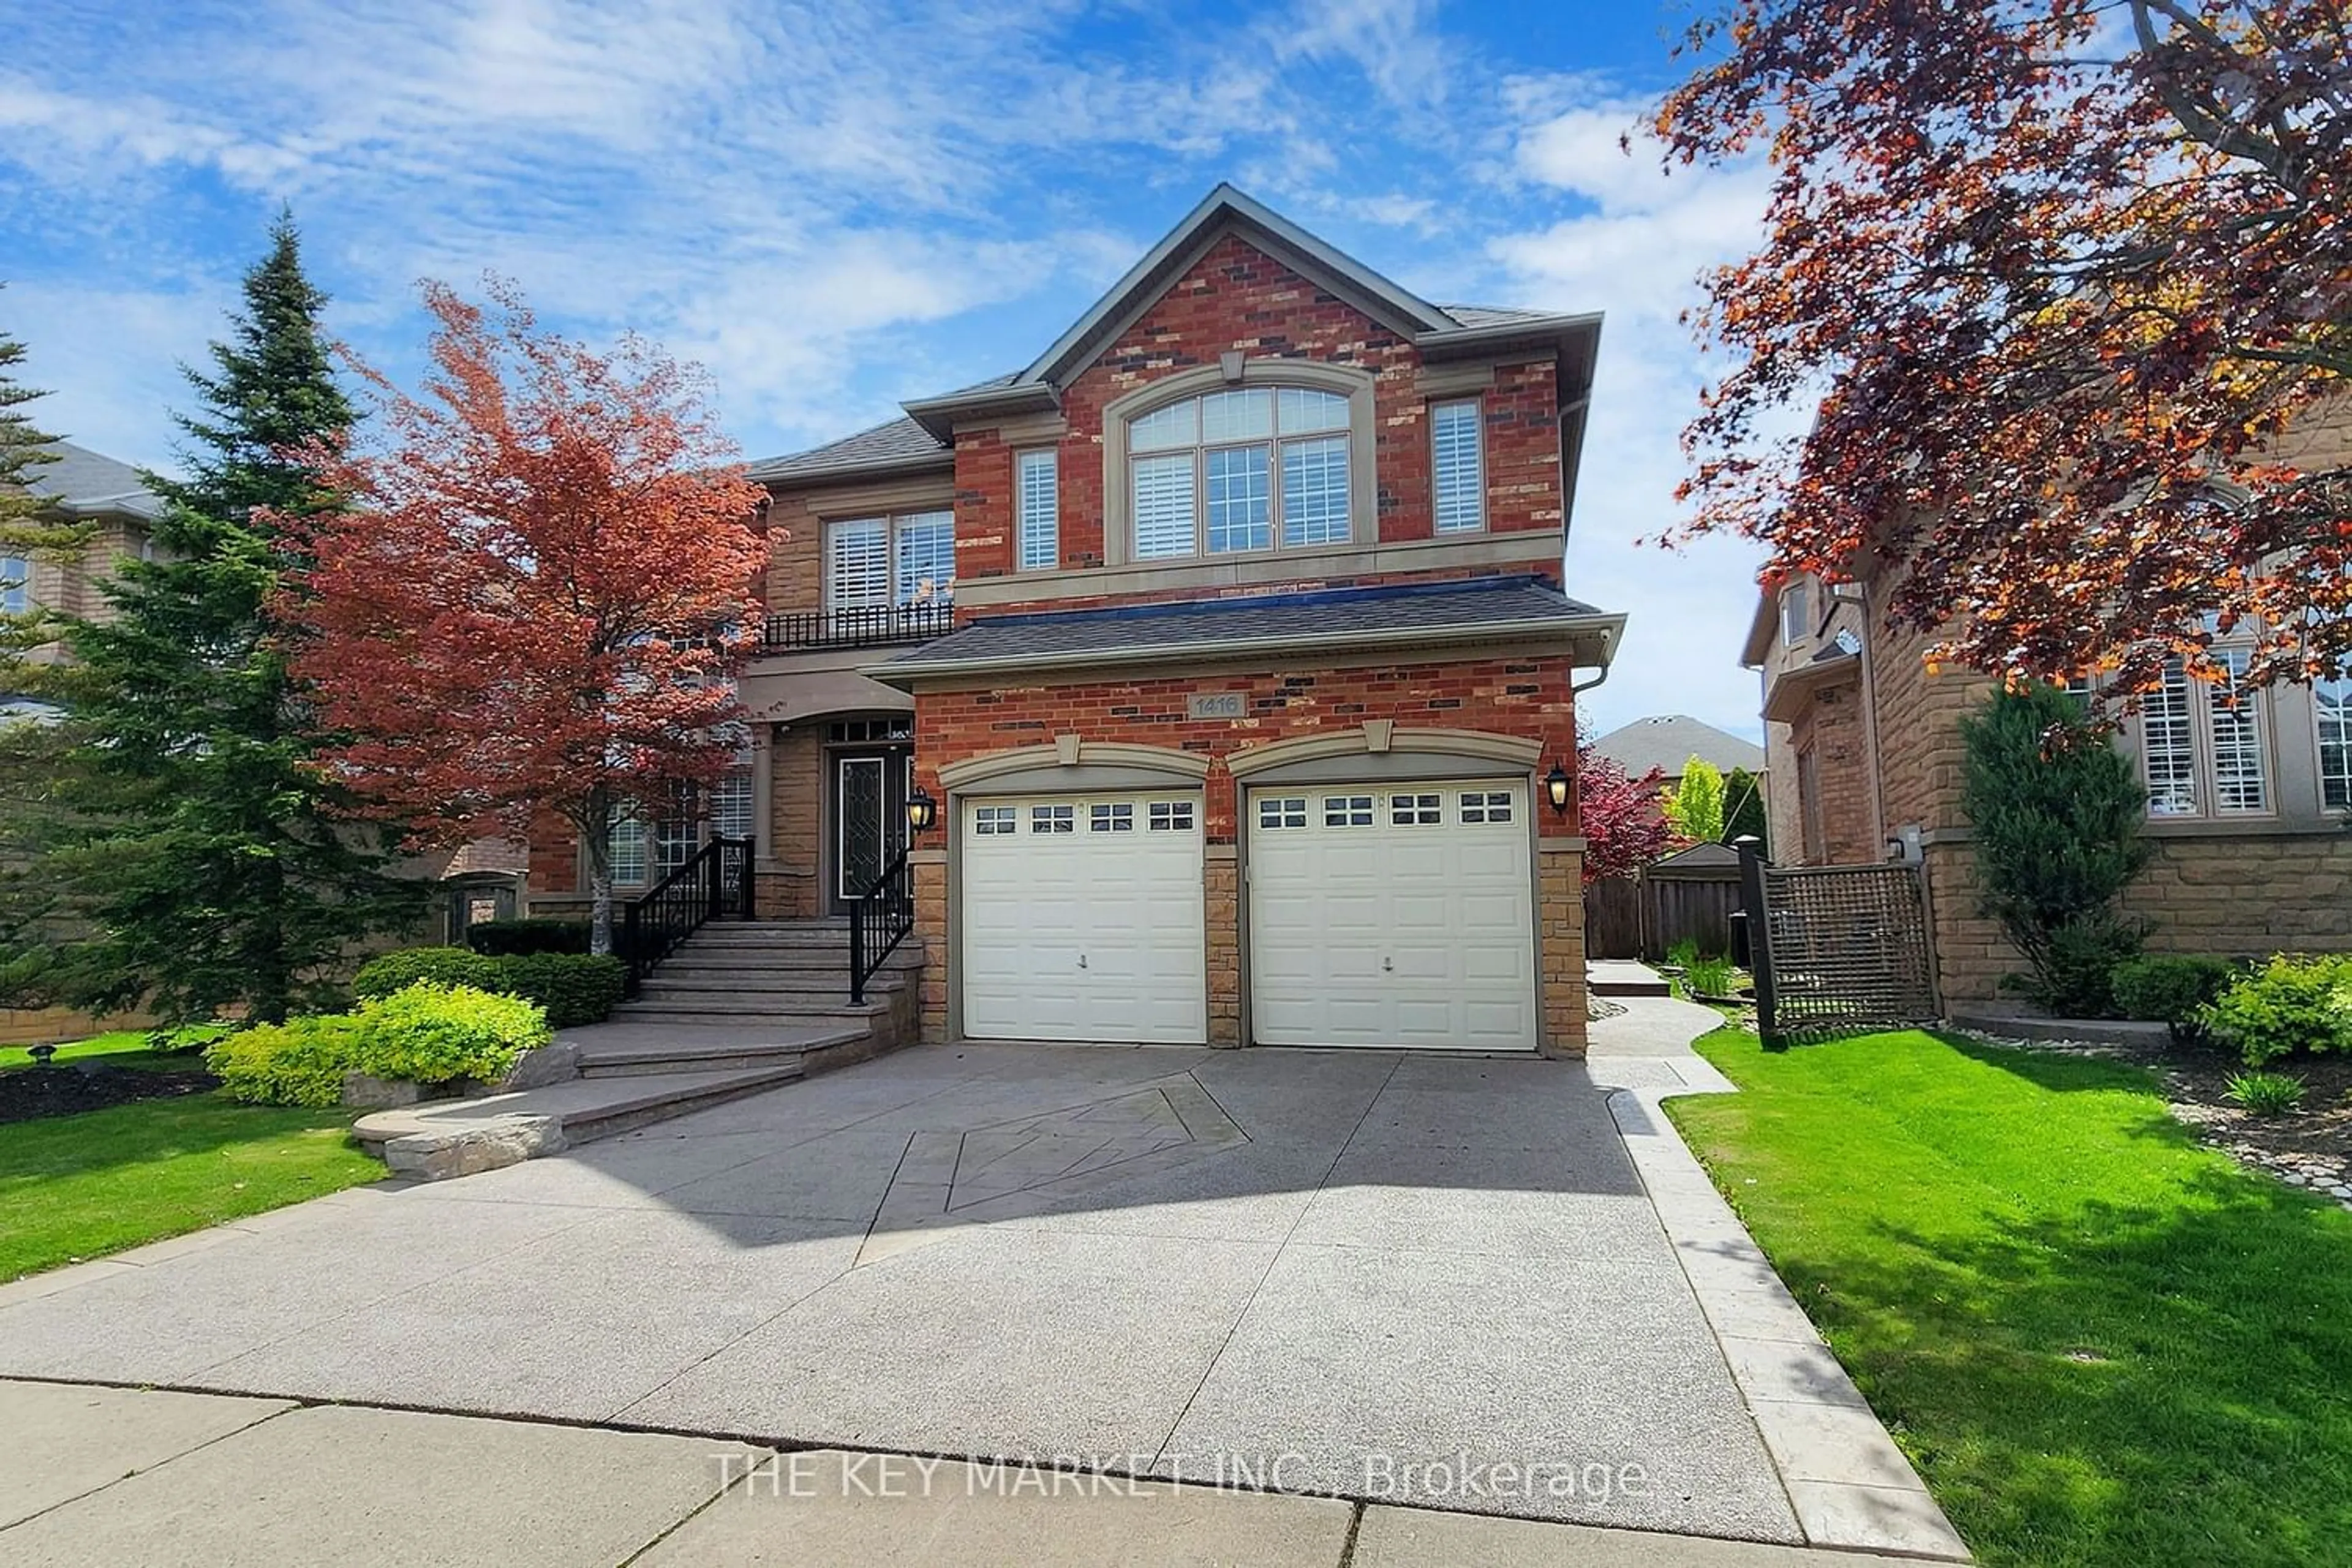 Home with brick exterior material for 1416 Craigleith Rd, Oakville Ontario L6H 7R2